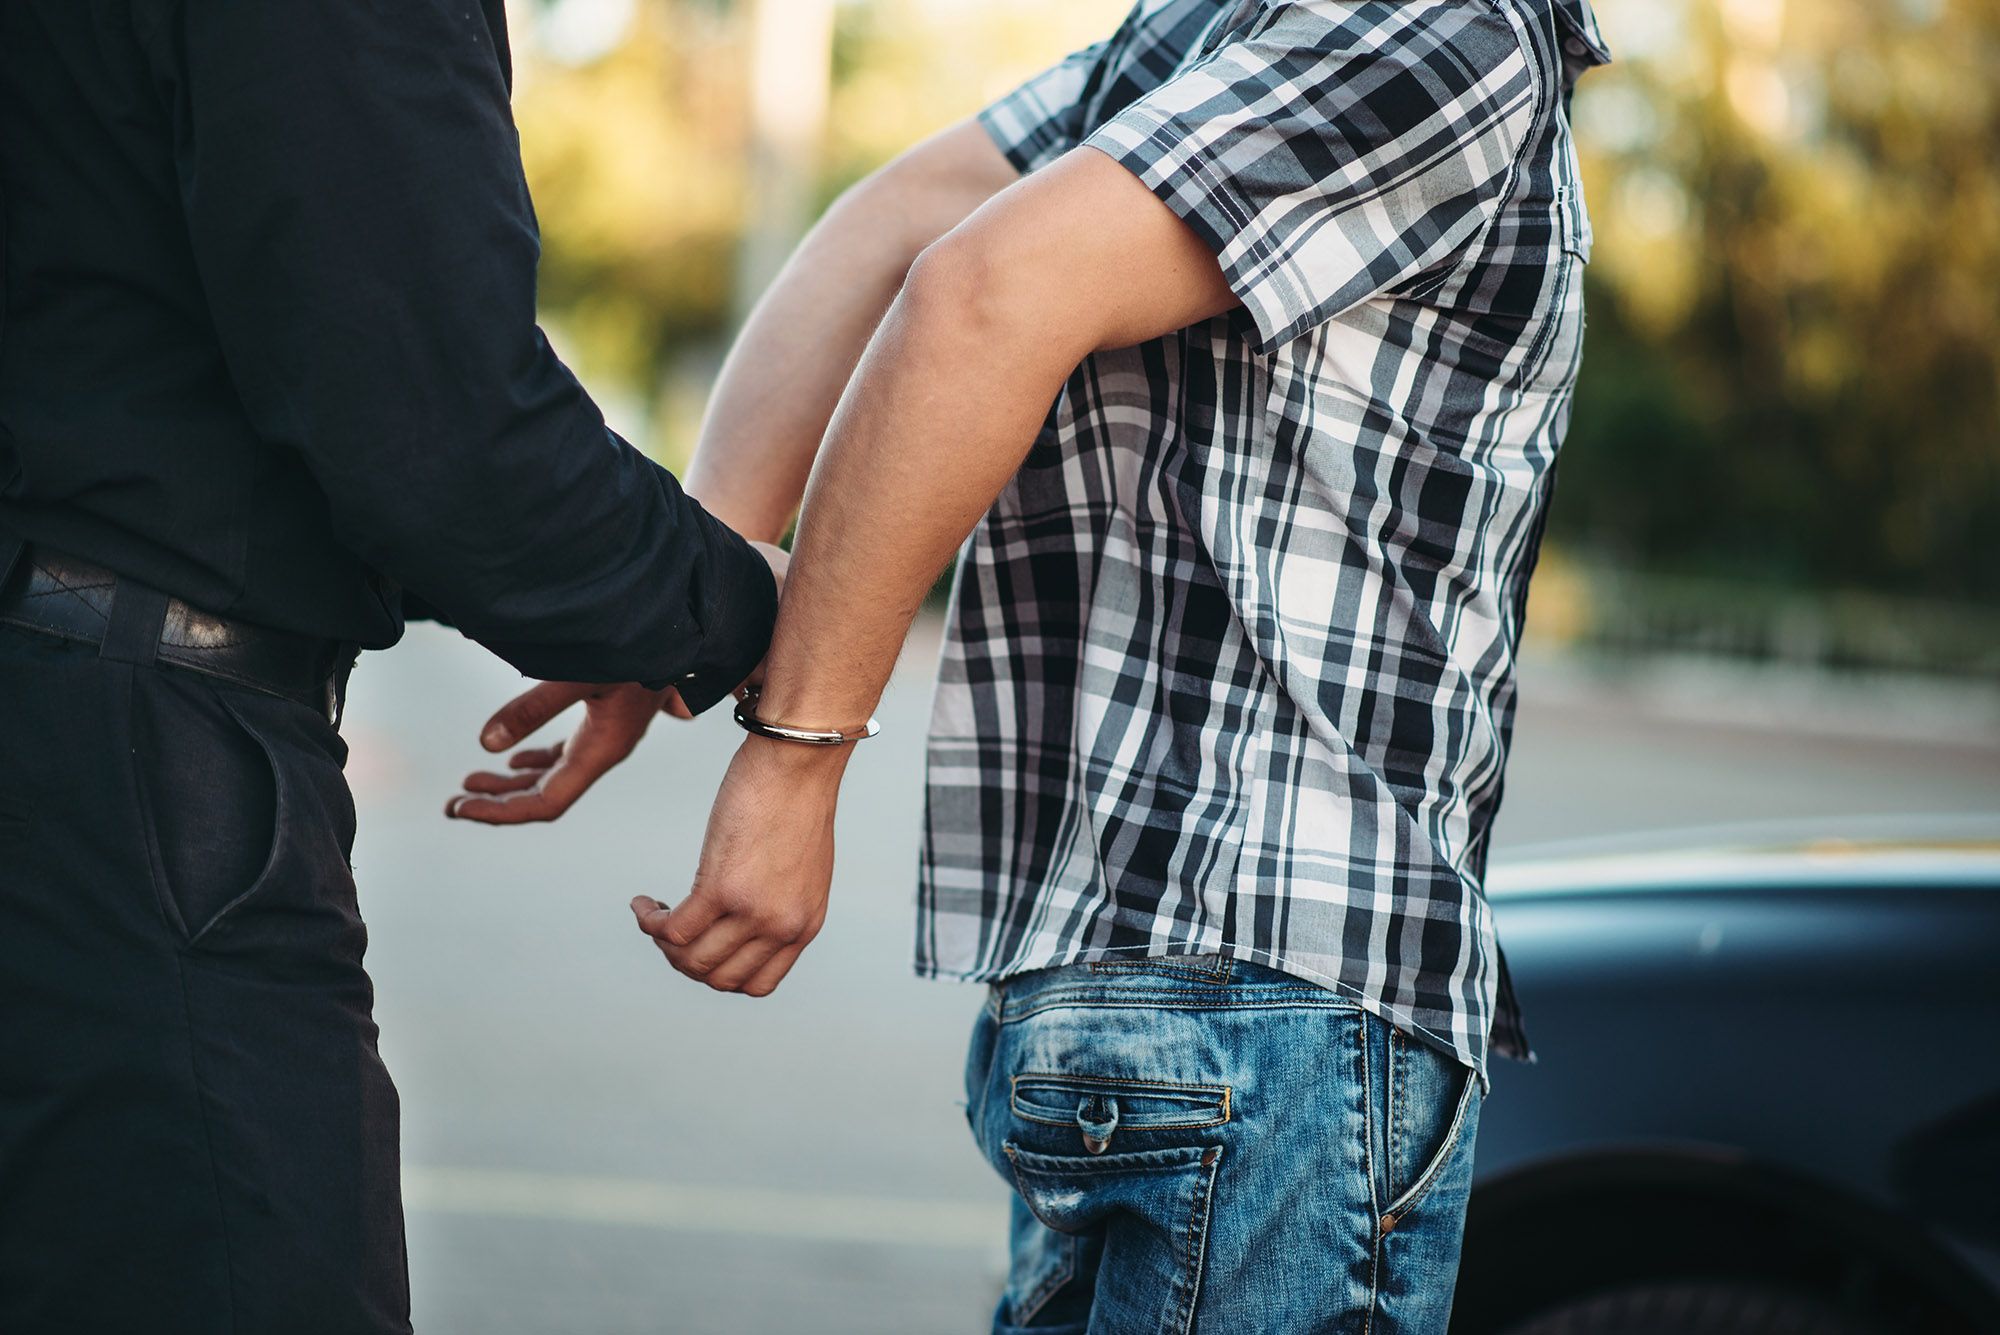 spring branch attorney dwi arrest reasonable suspicion | driving while intoxicated defense lawyer